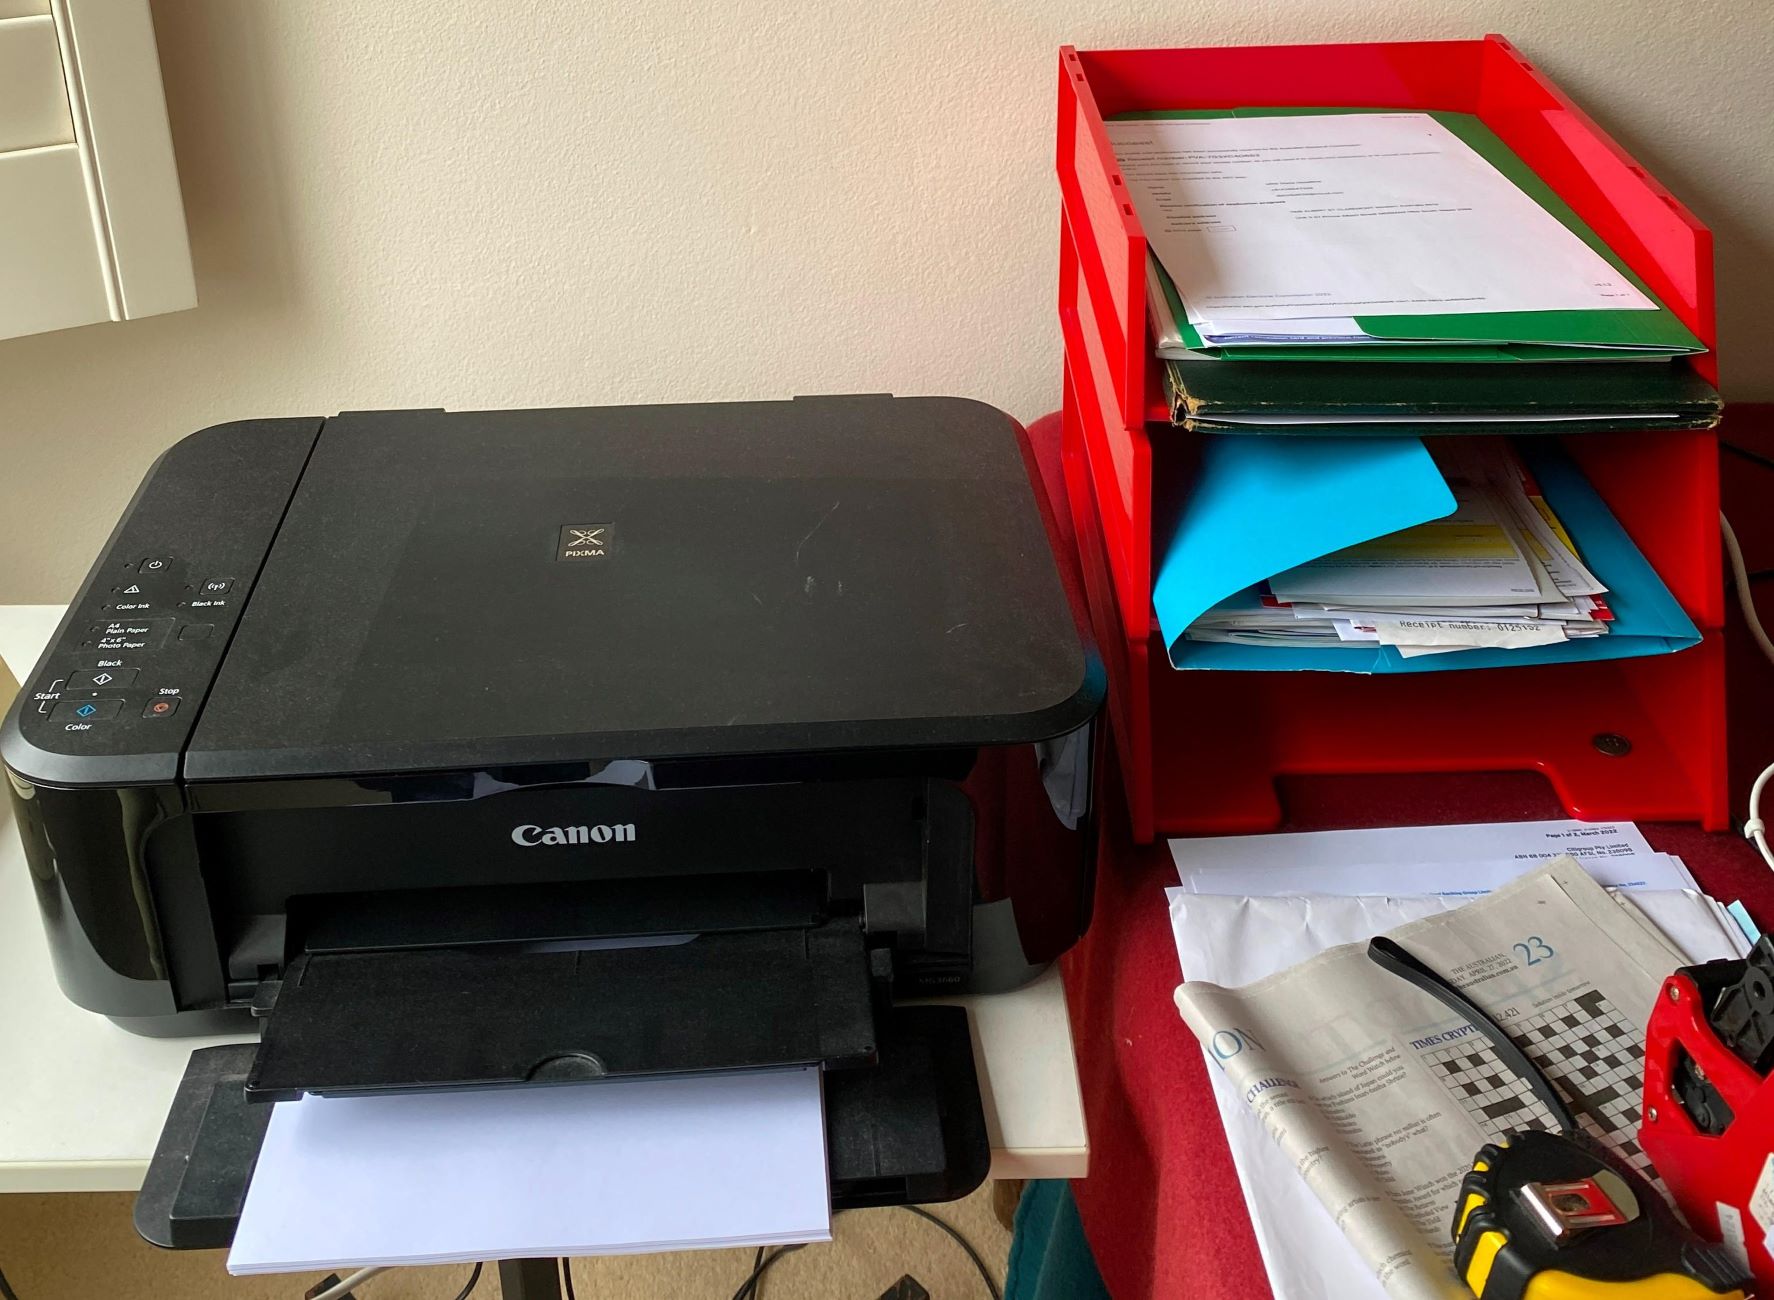 How Do I Connect My Canon MG3600 Printer To Wi-Fi